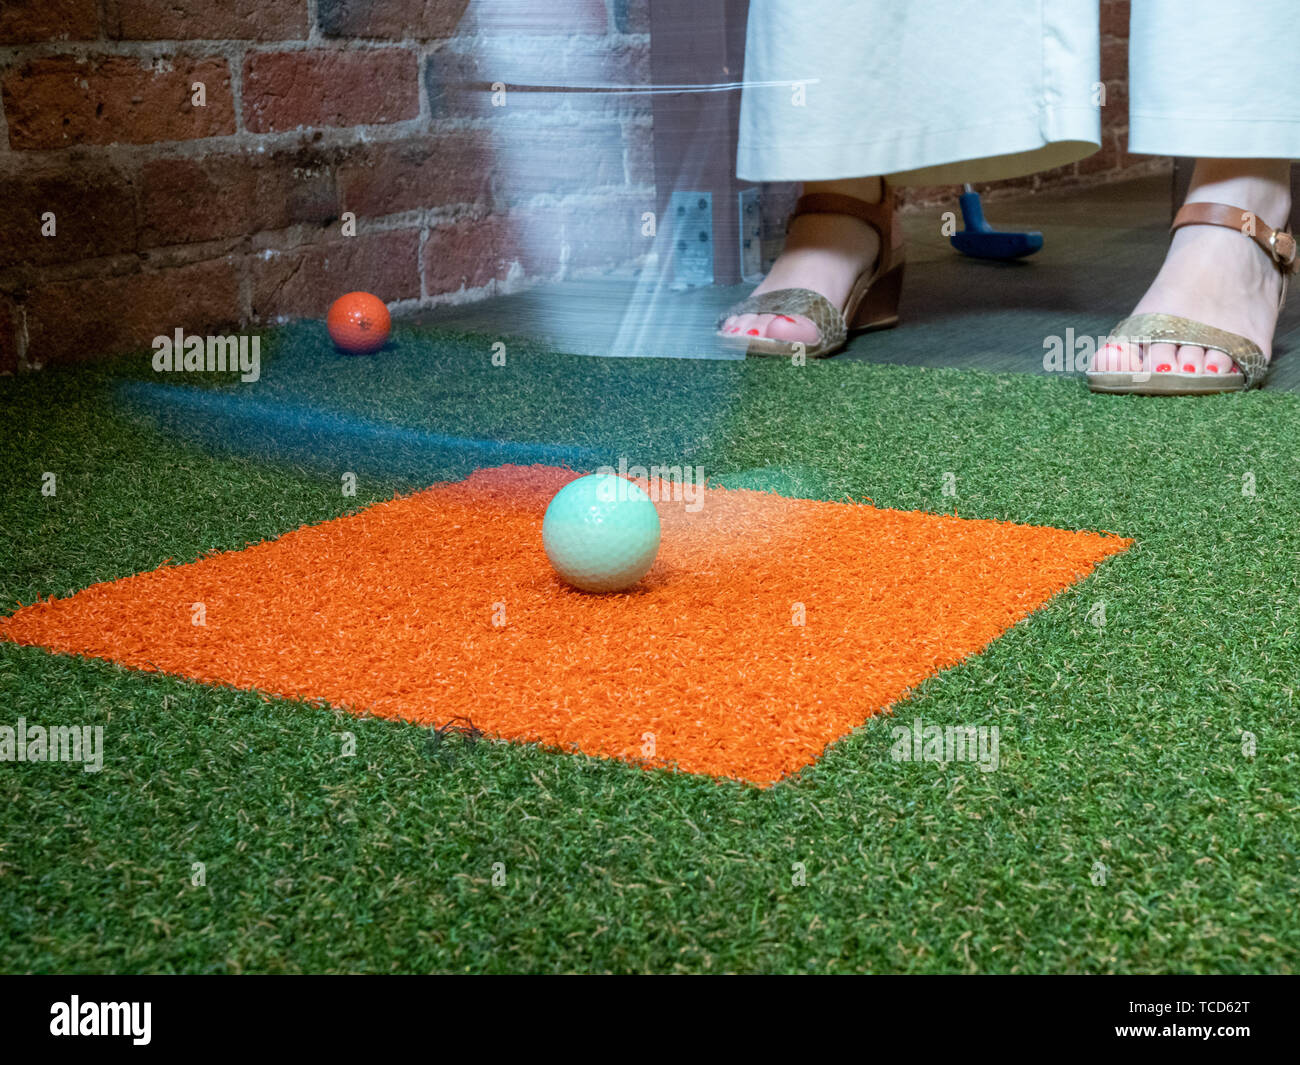 Woman playing miniature golf hitting ball with a putter mid swing Stock Photo